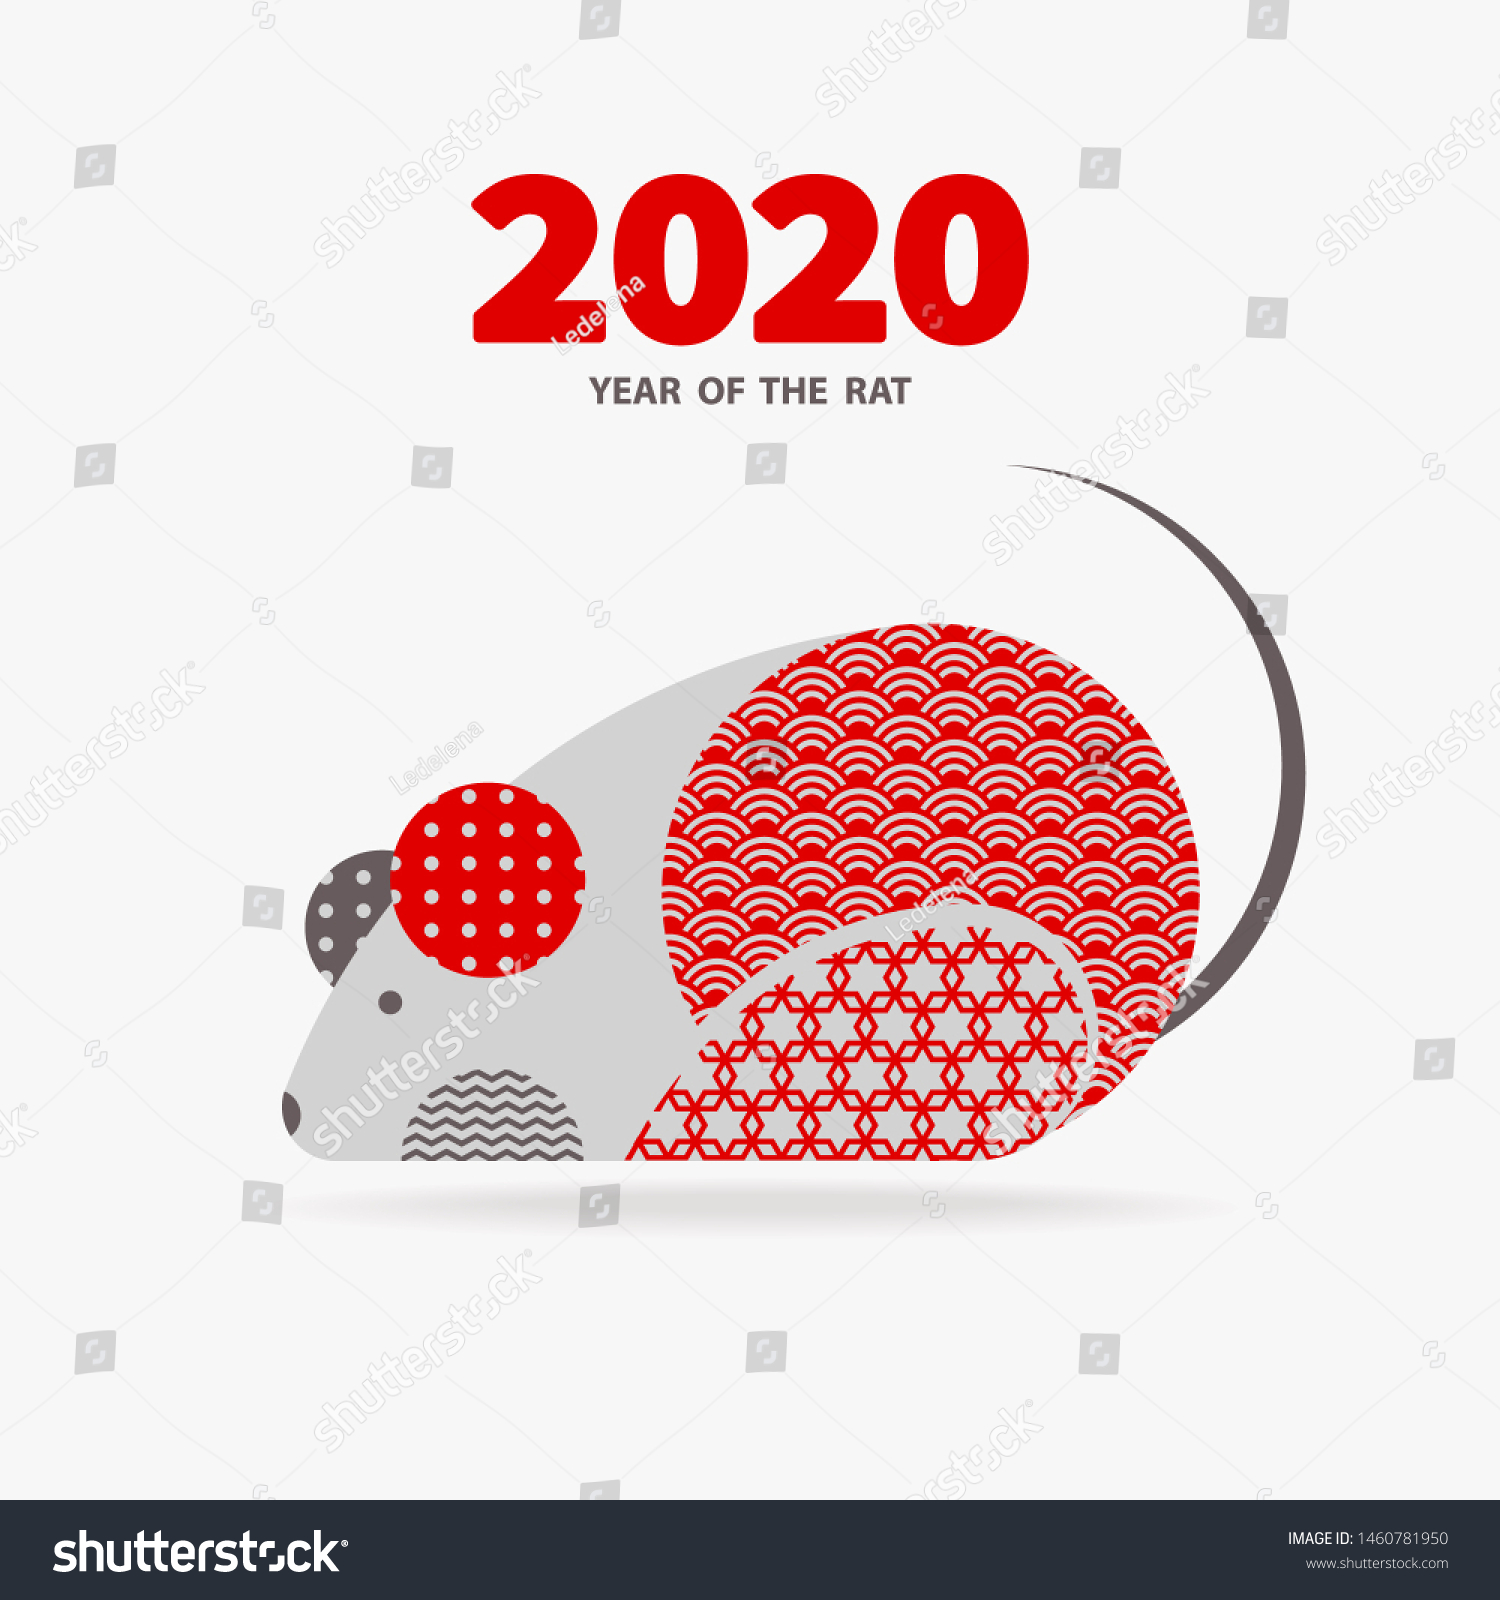 Rat Symbol 2020 Chinese New Year Stock Vector Royalty Free 1460781950